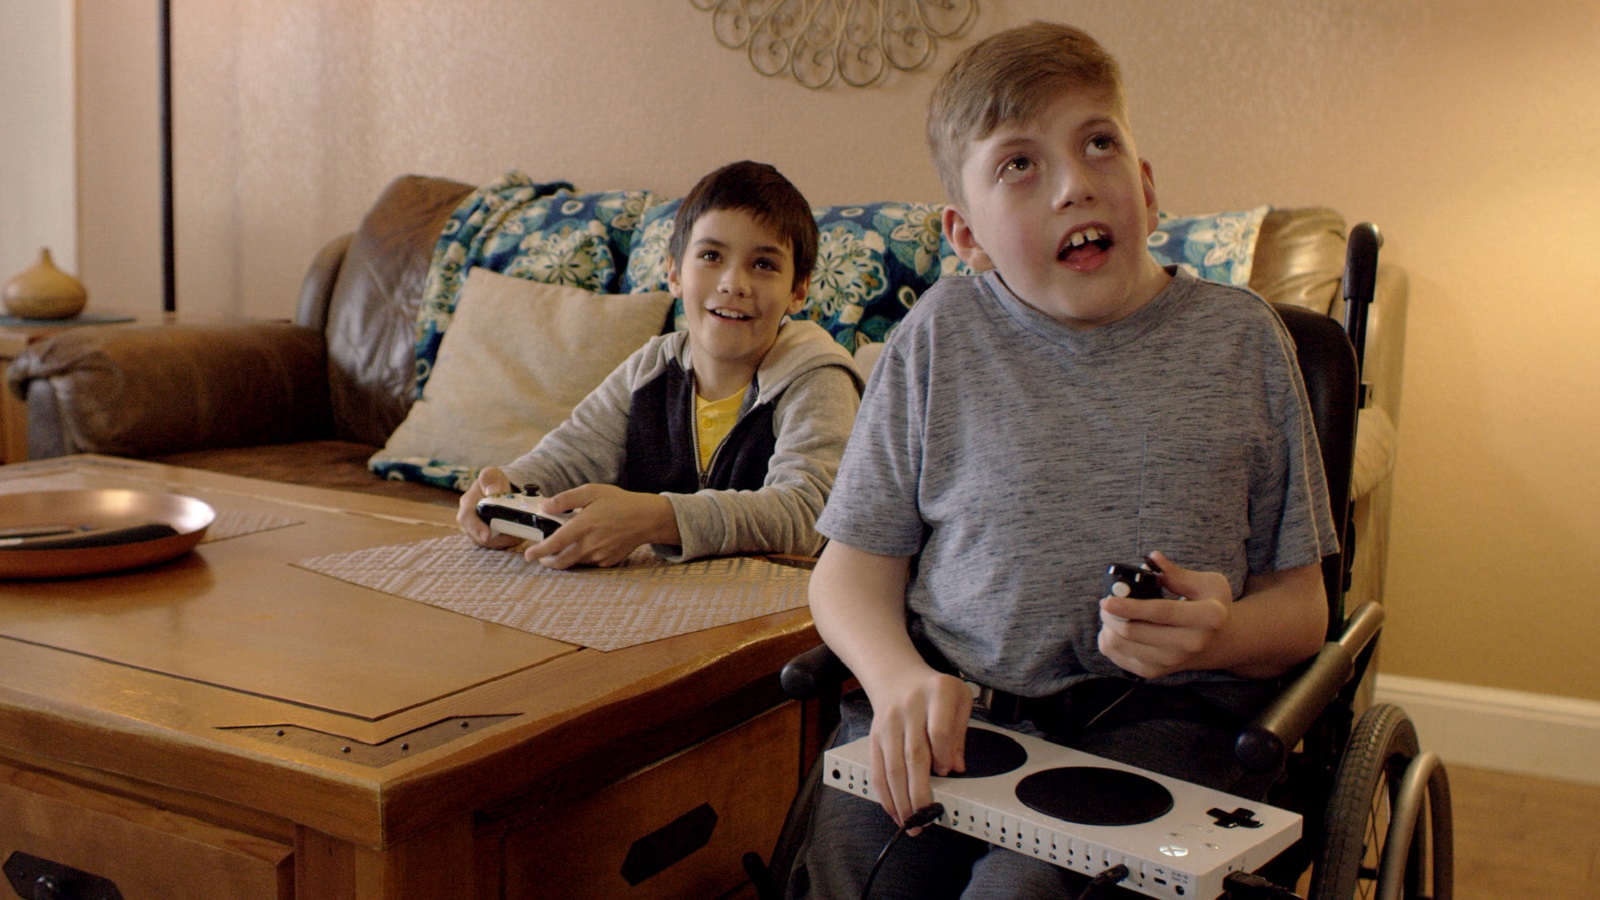 Microsoft Empowers Kids with Disabilities to Improve their Game